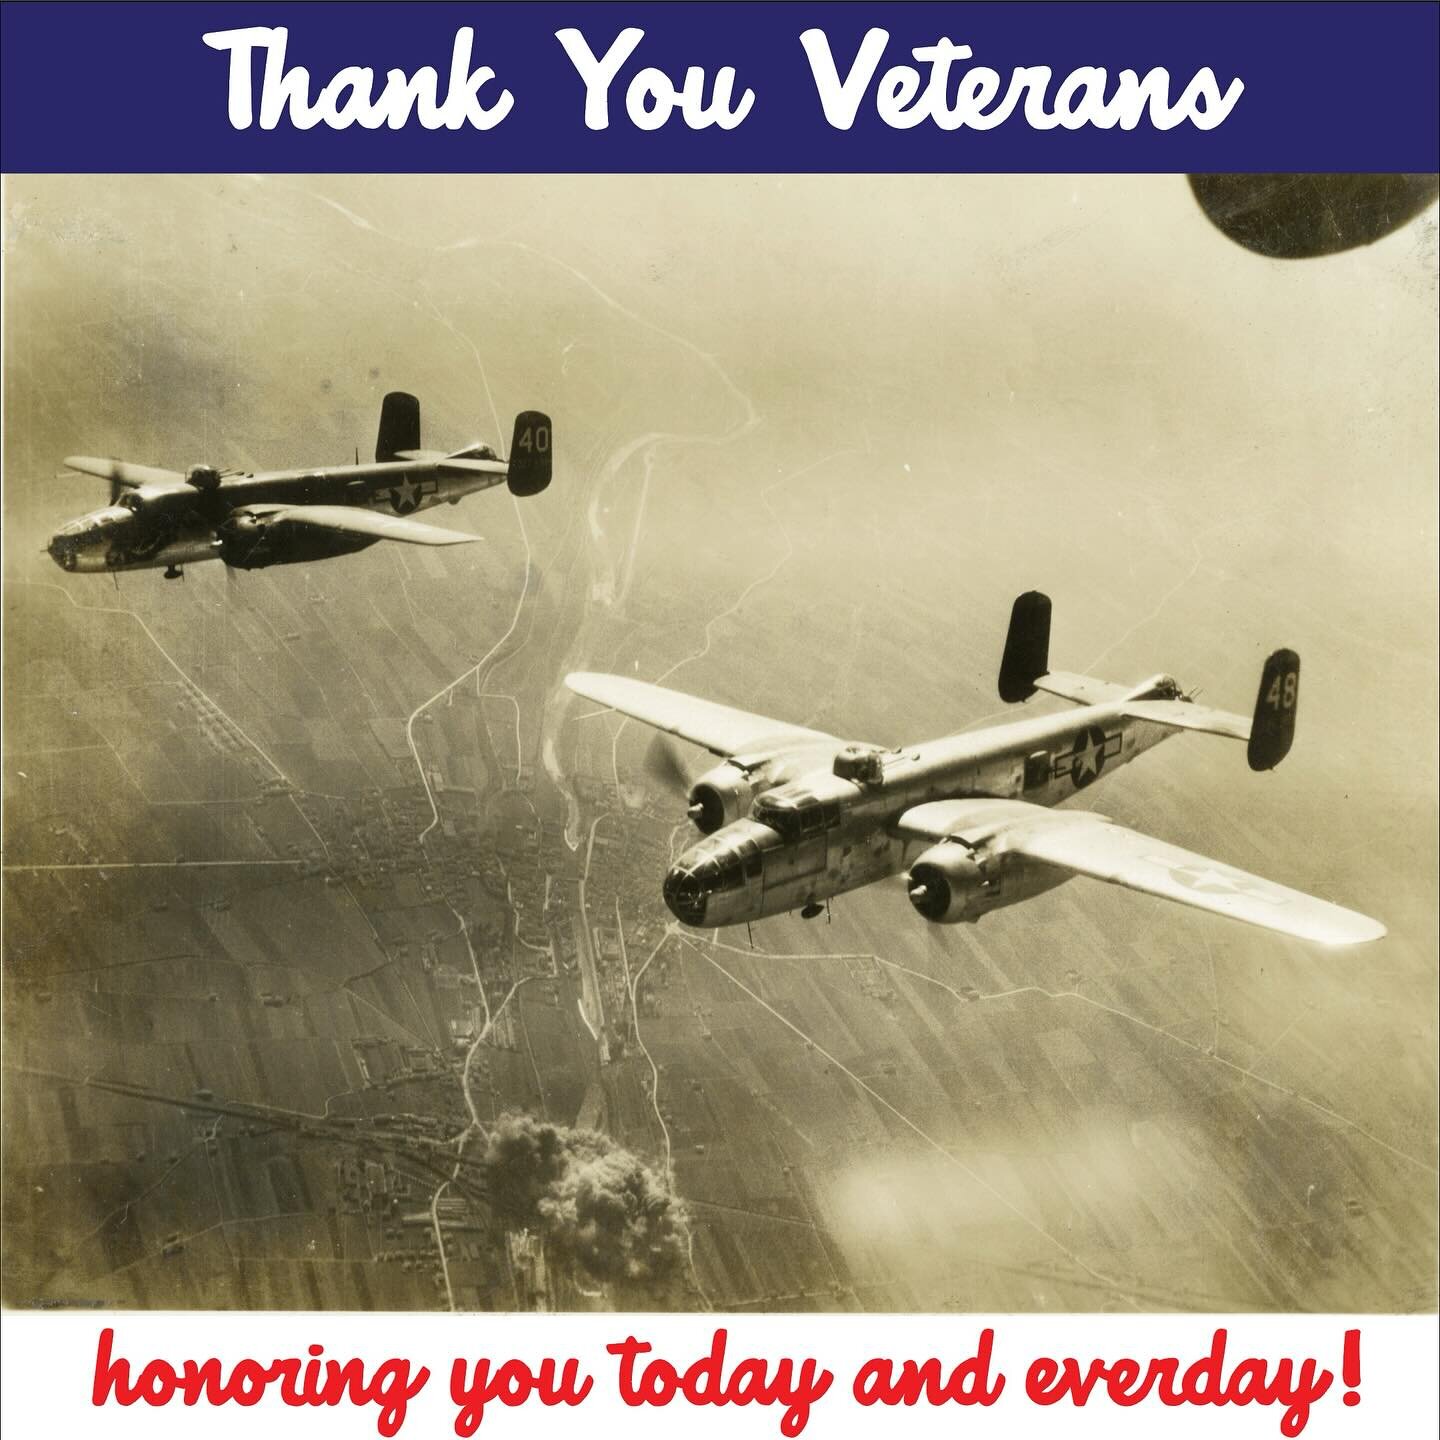 Huge thank you to our Veterans near and far! #veterans #veteransday